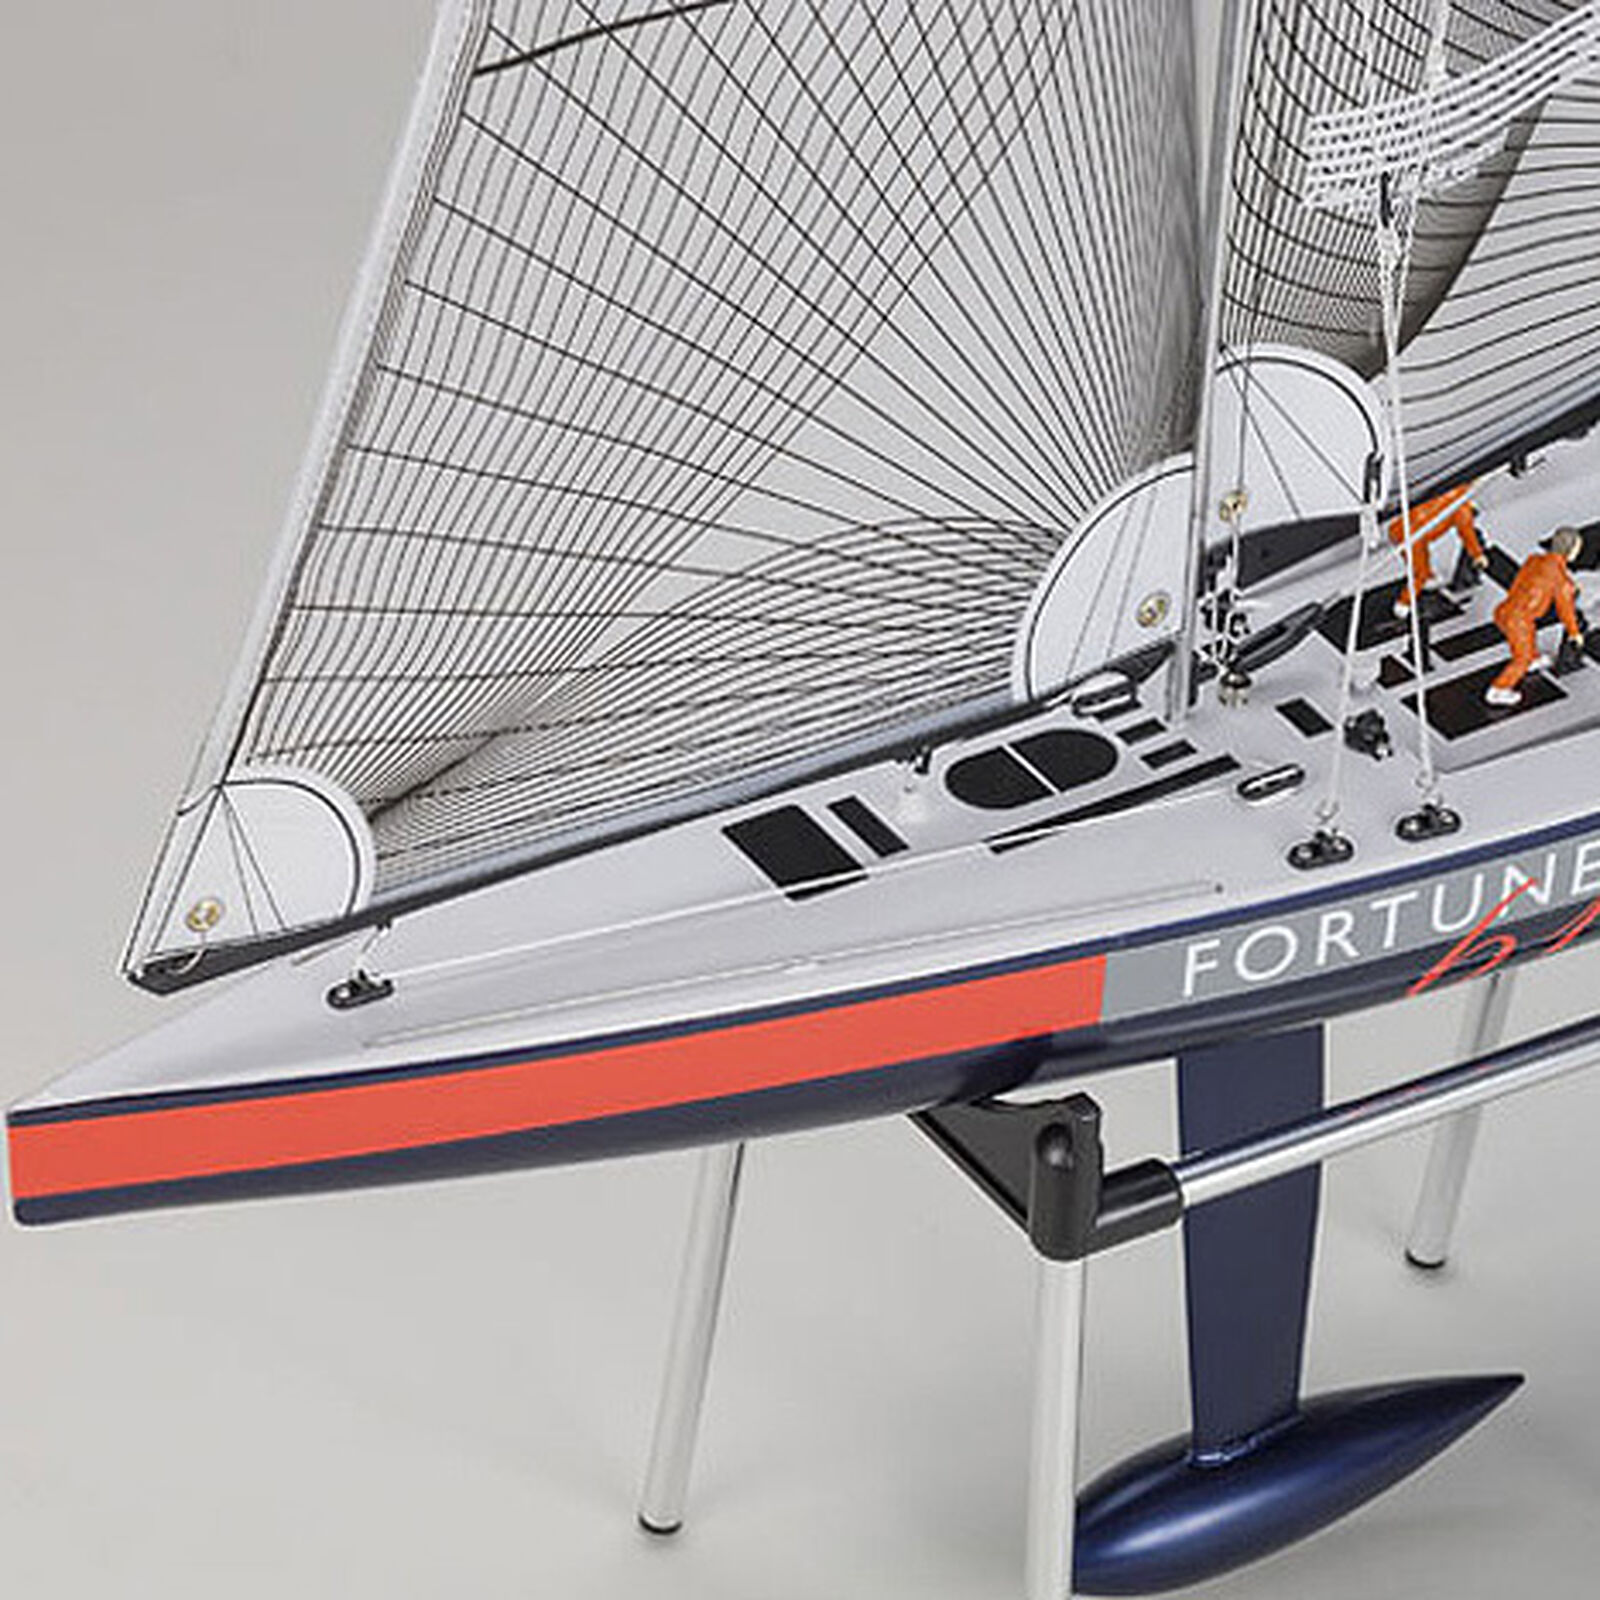 kyosho fortune 612 iii rc sailboat